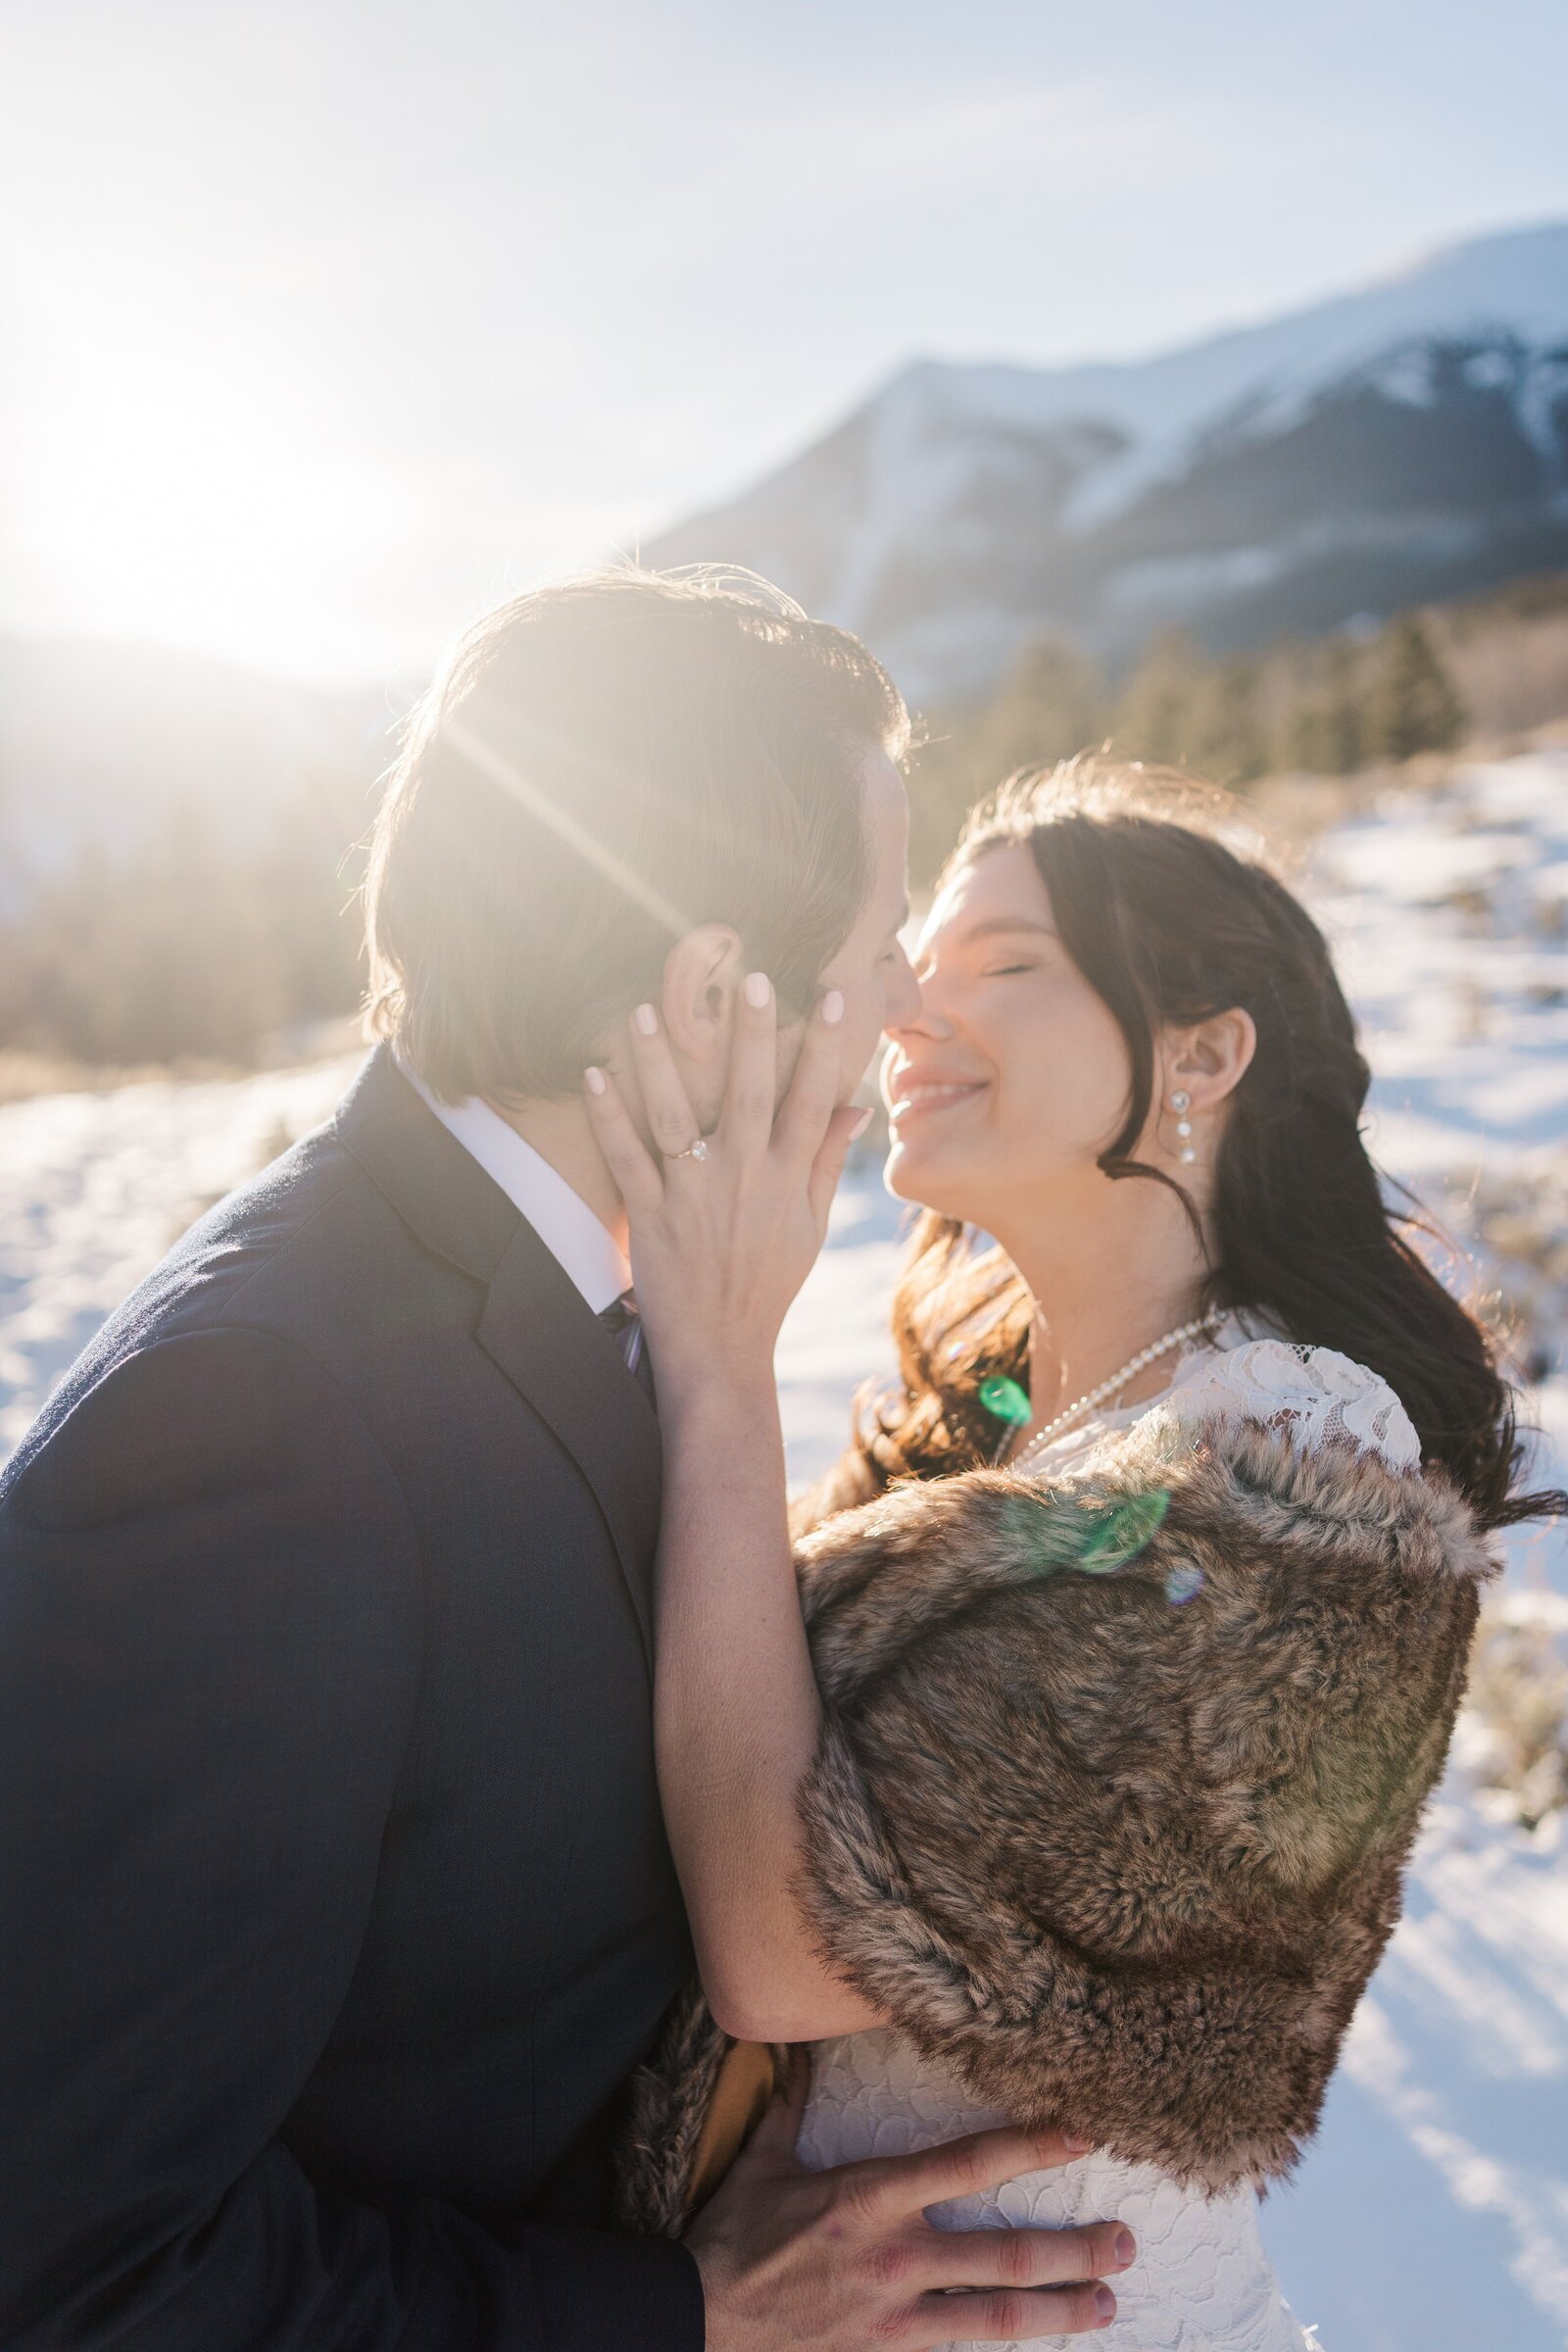 Trust Sam Immer Photography to capture the majesty and beauty of Colorado's breathtaking landscapes in your engagement or anniversary photos. Our skilled eye and creative approach will create memories to last a lifetime.